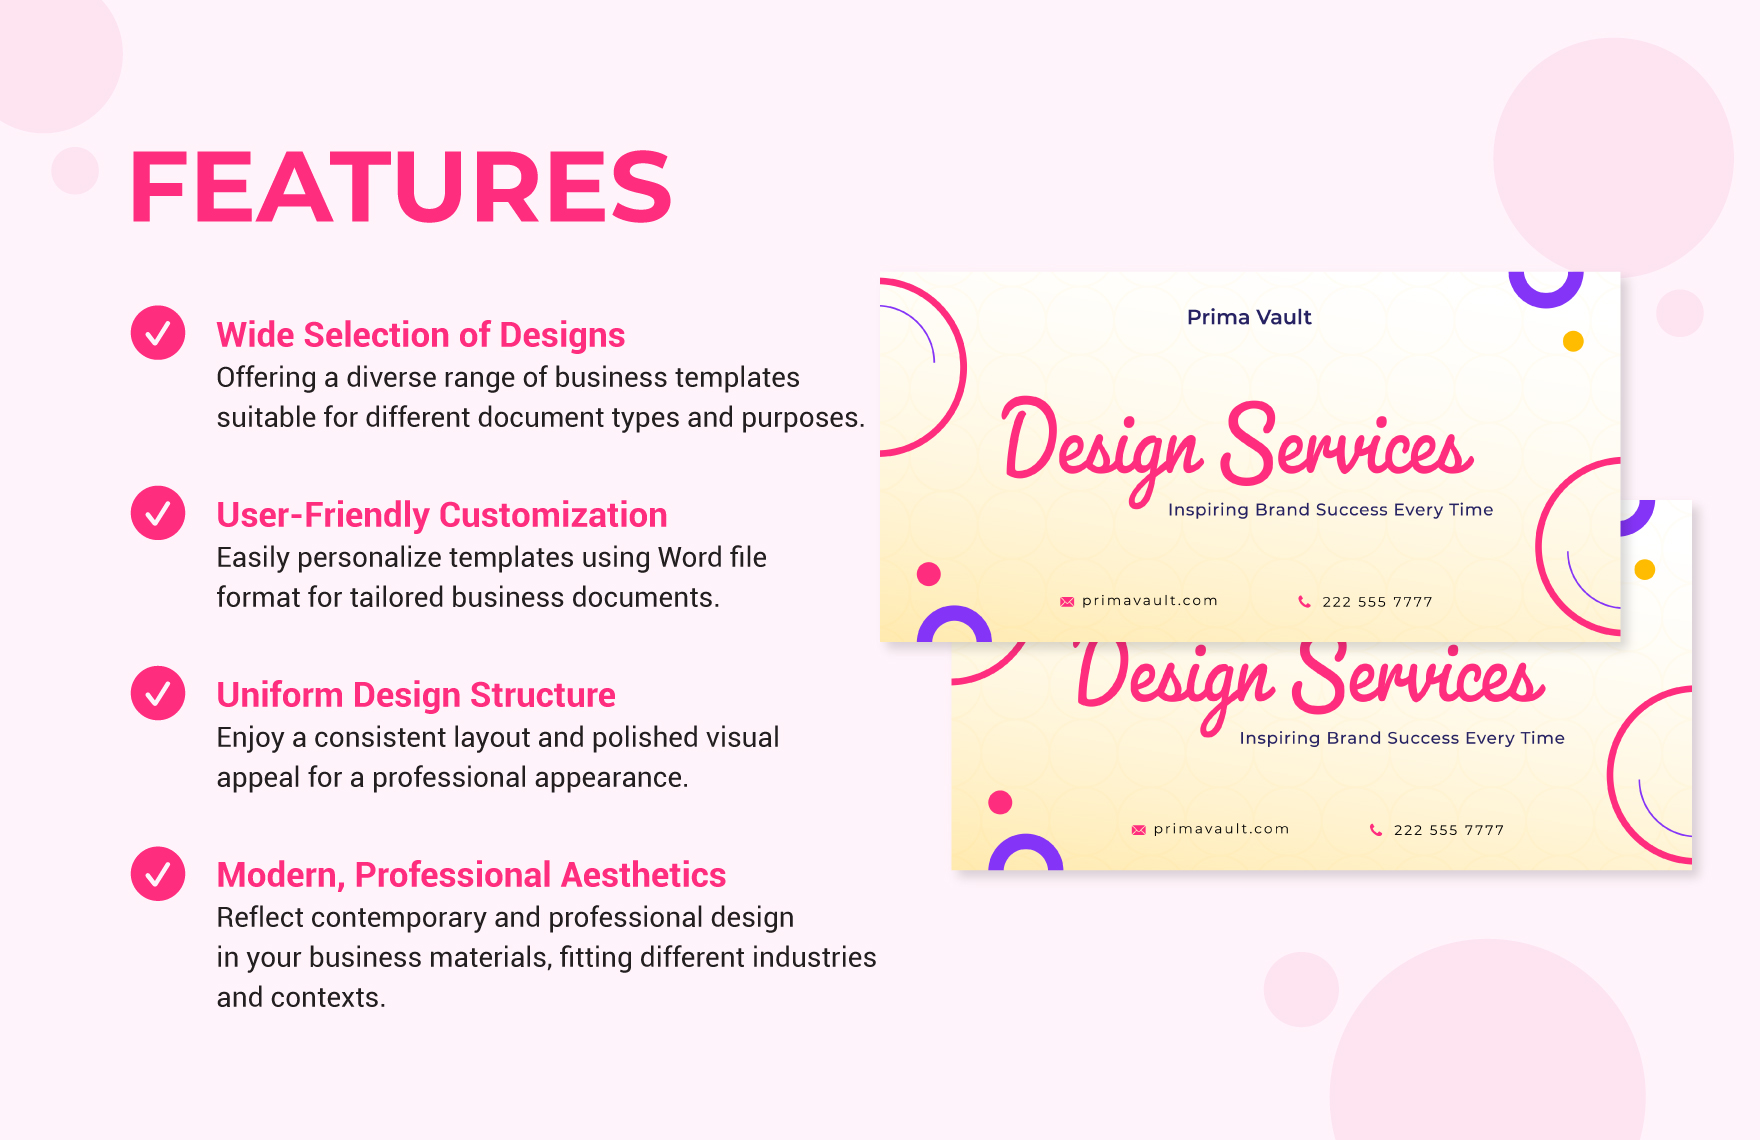 Small Business Banner Template